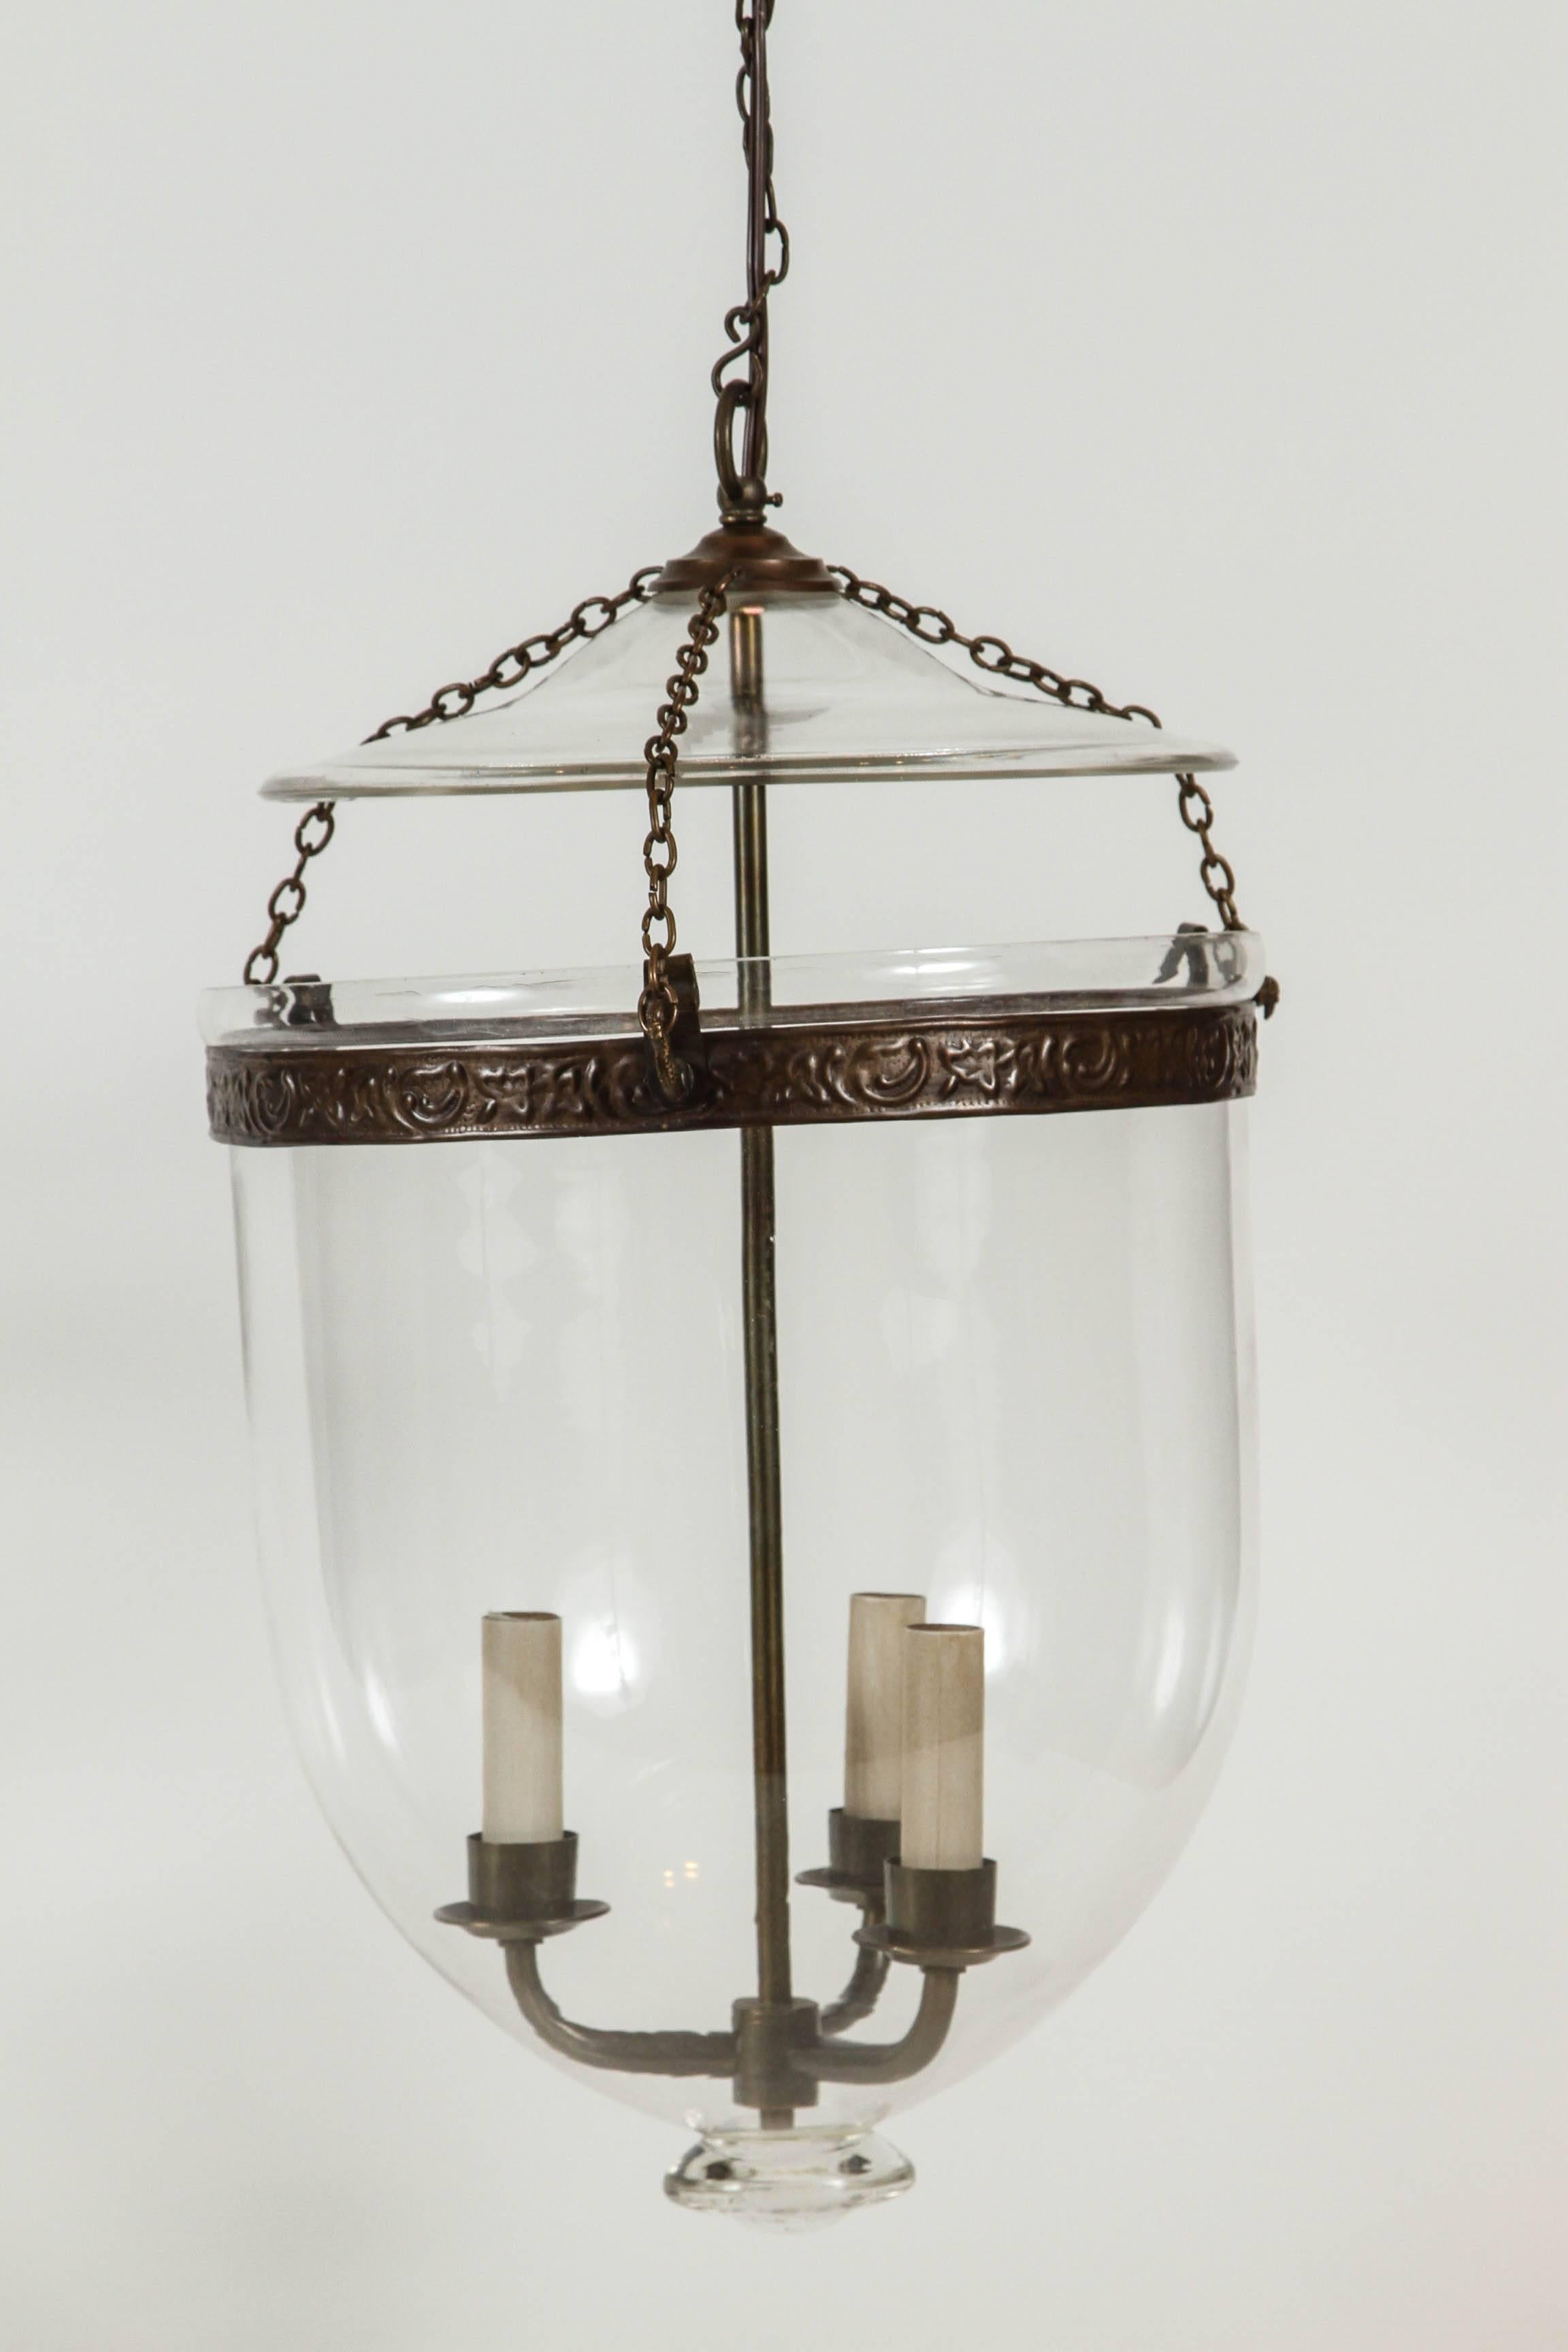 Pair of vintage glass pendant lanterns featuring a chain suspended lid with bird hook detail. Newly wired for USA use. Takes three candelabra bulbs. 

Dimensions: 12 1/8